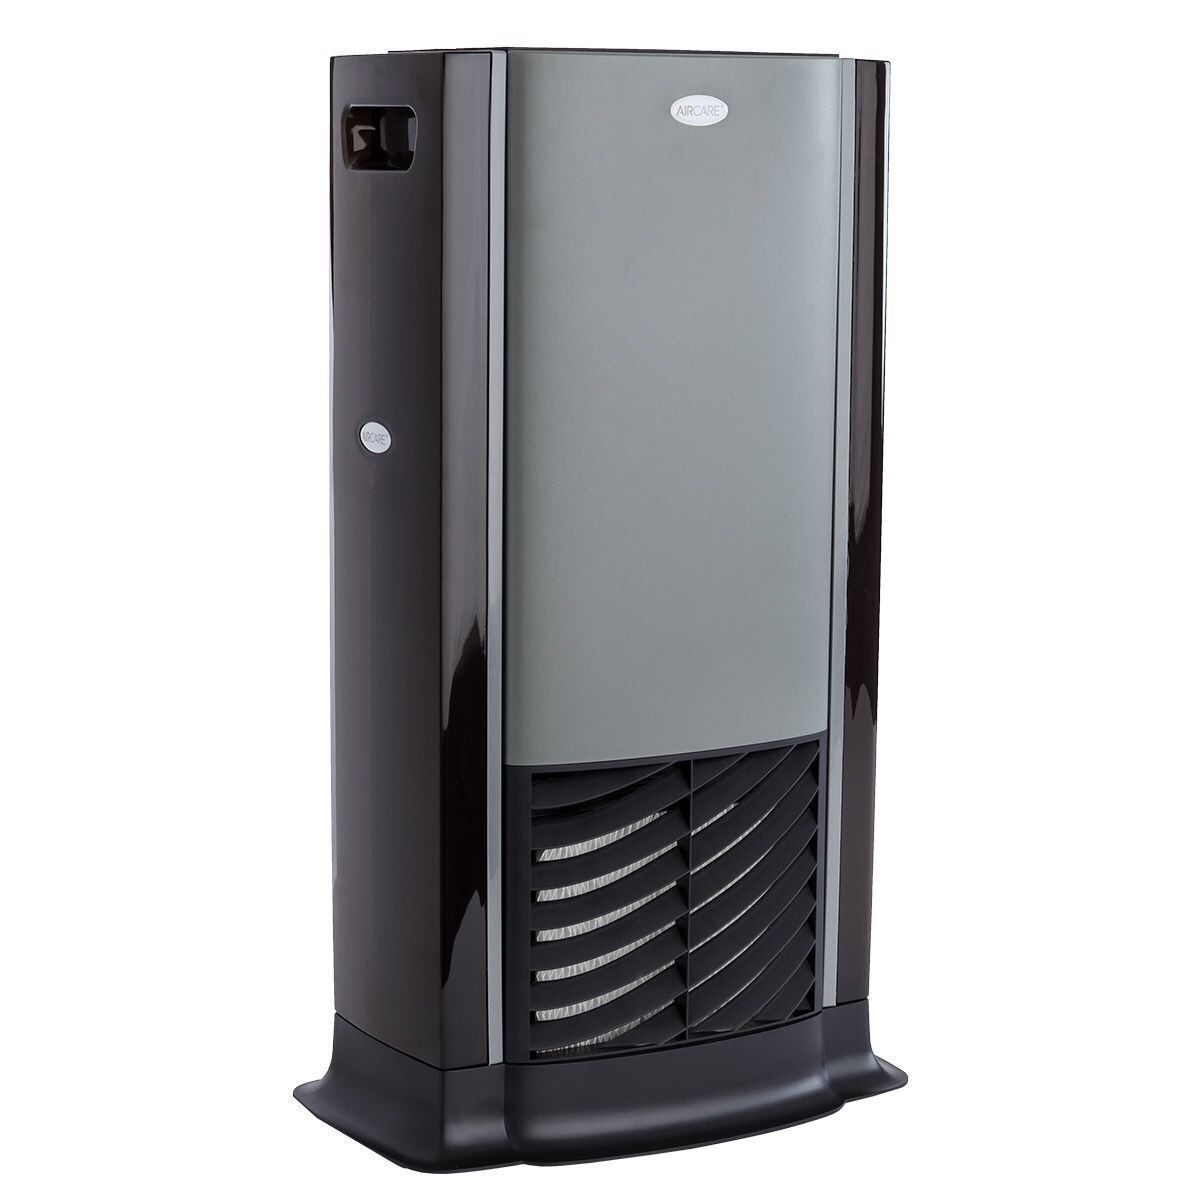 AIRCARE Tower Evaporative Humidifier for 1200 sq. ft. Black-Titanium D46720